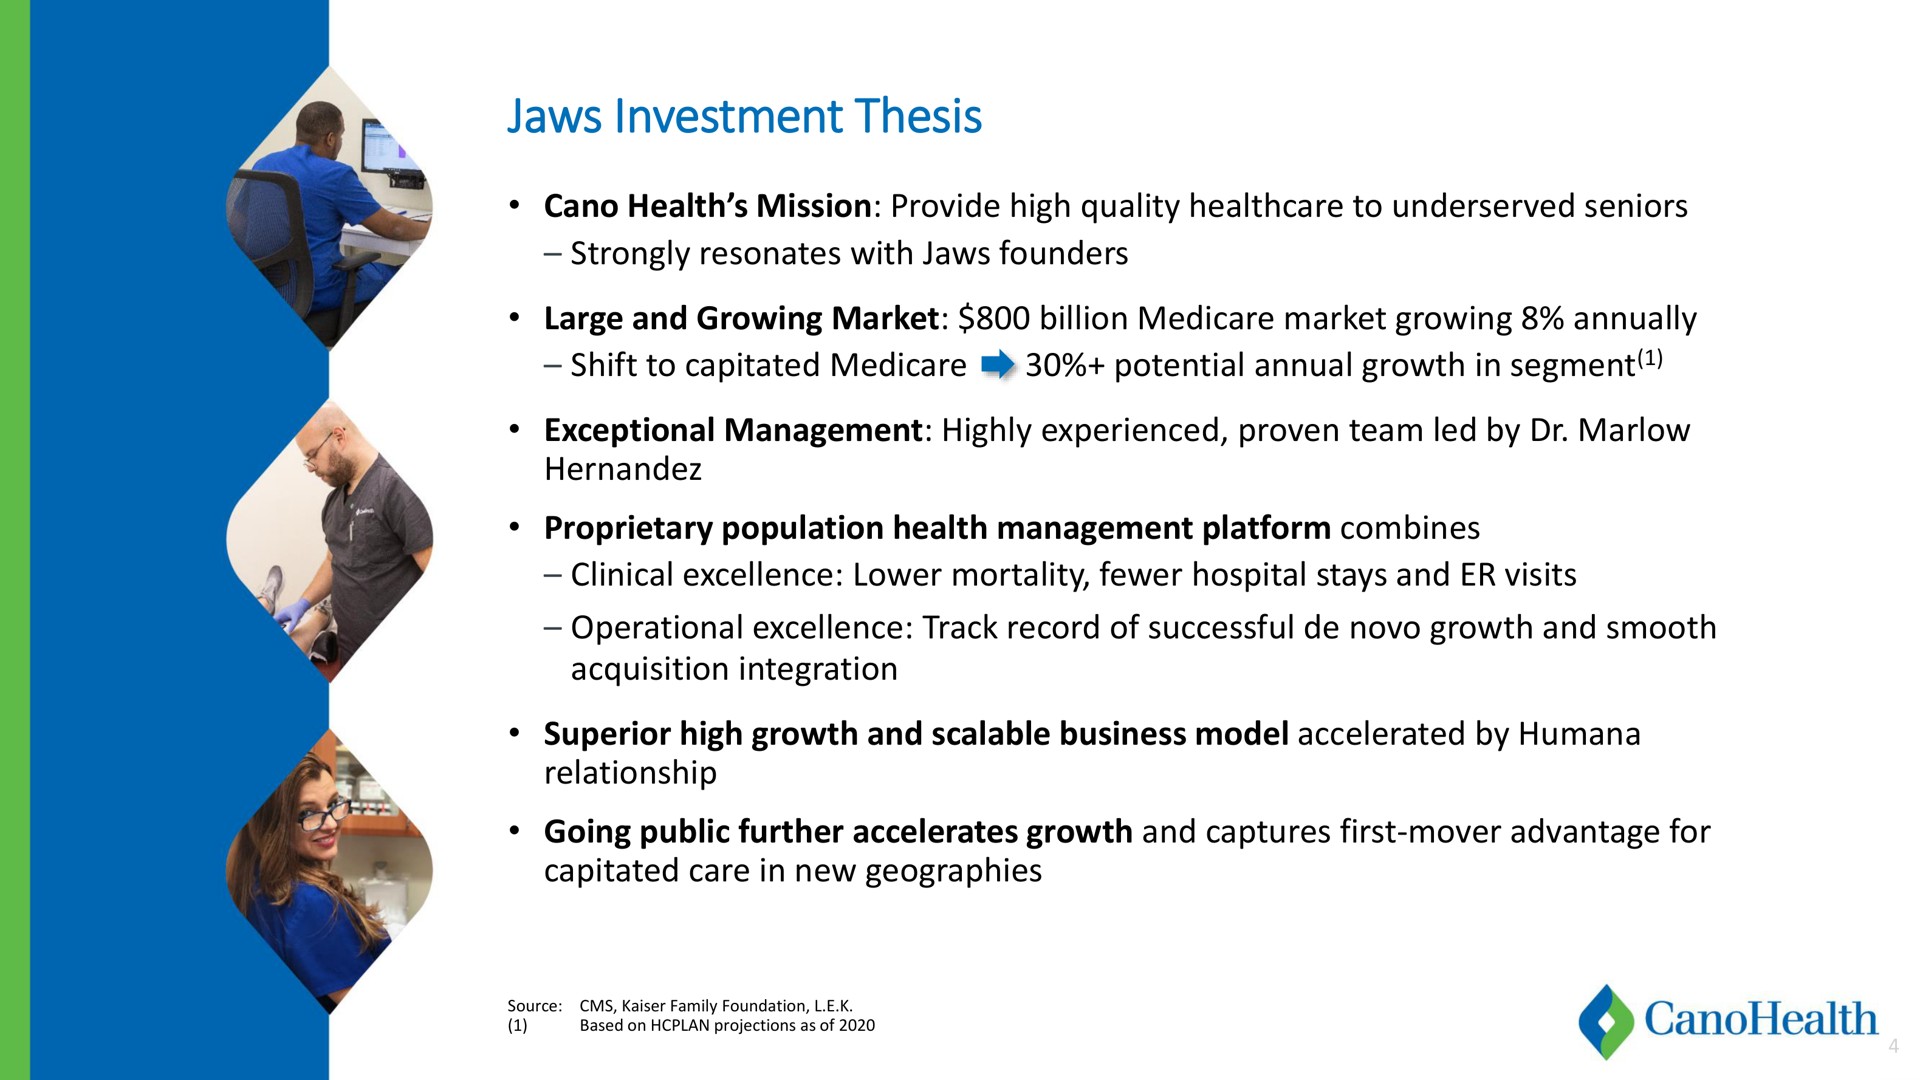 jaws investment thesis | Cano Health